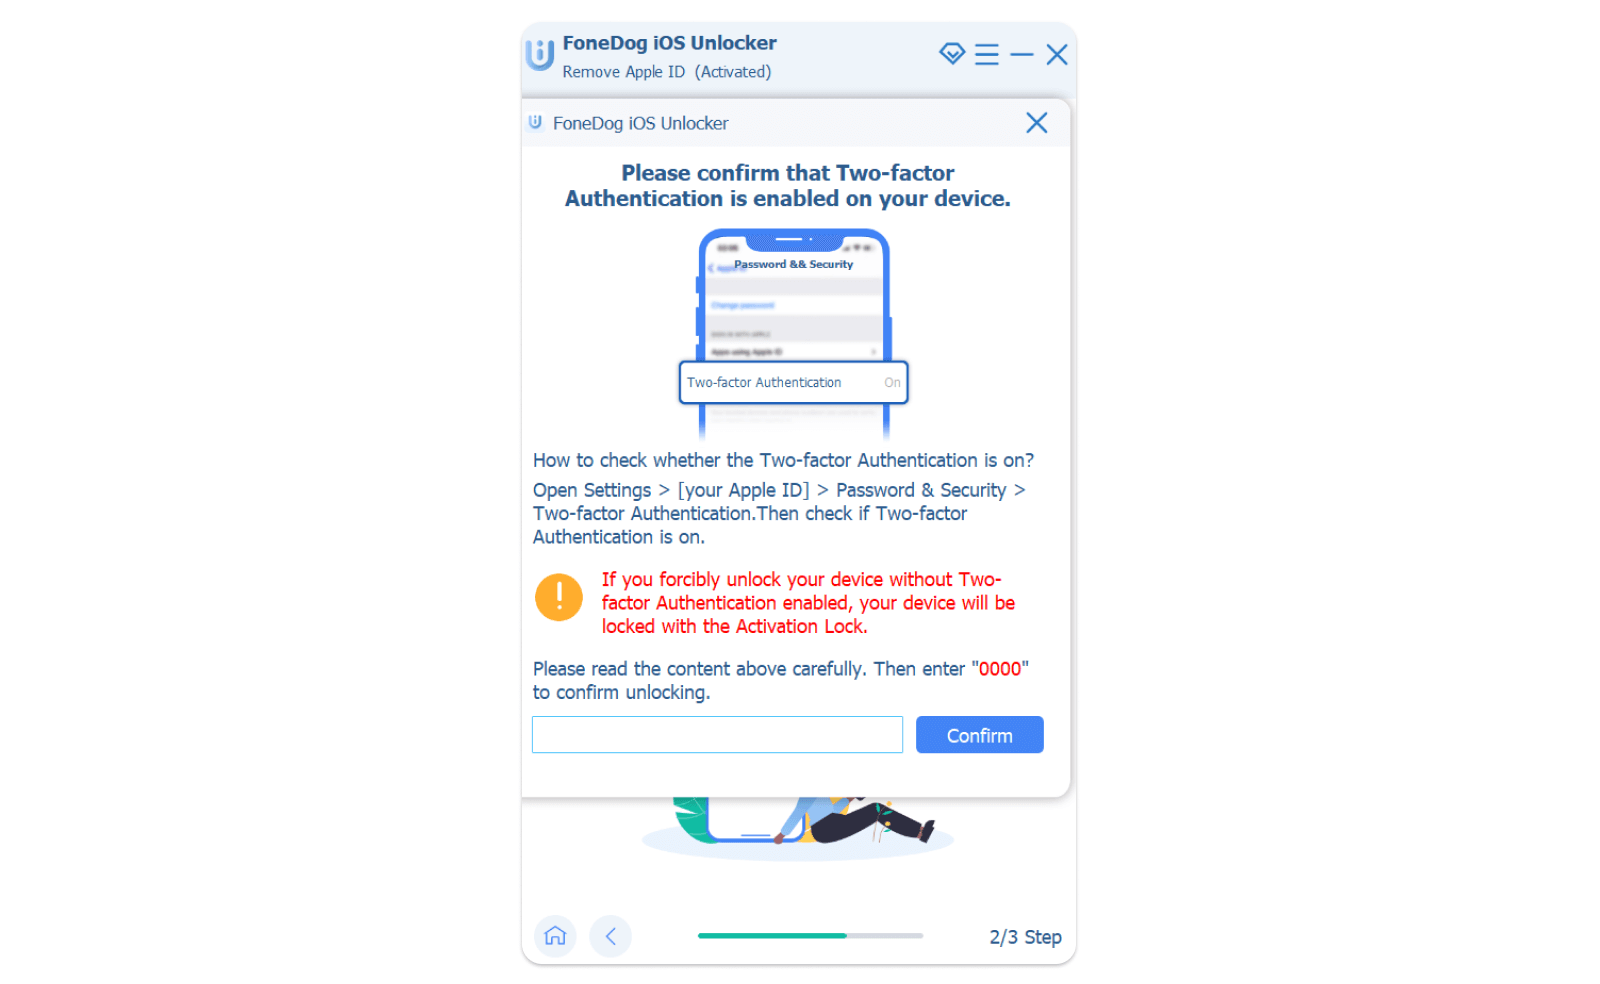 Confirm Removing Apple ID